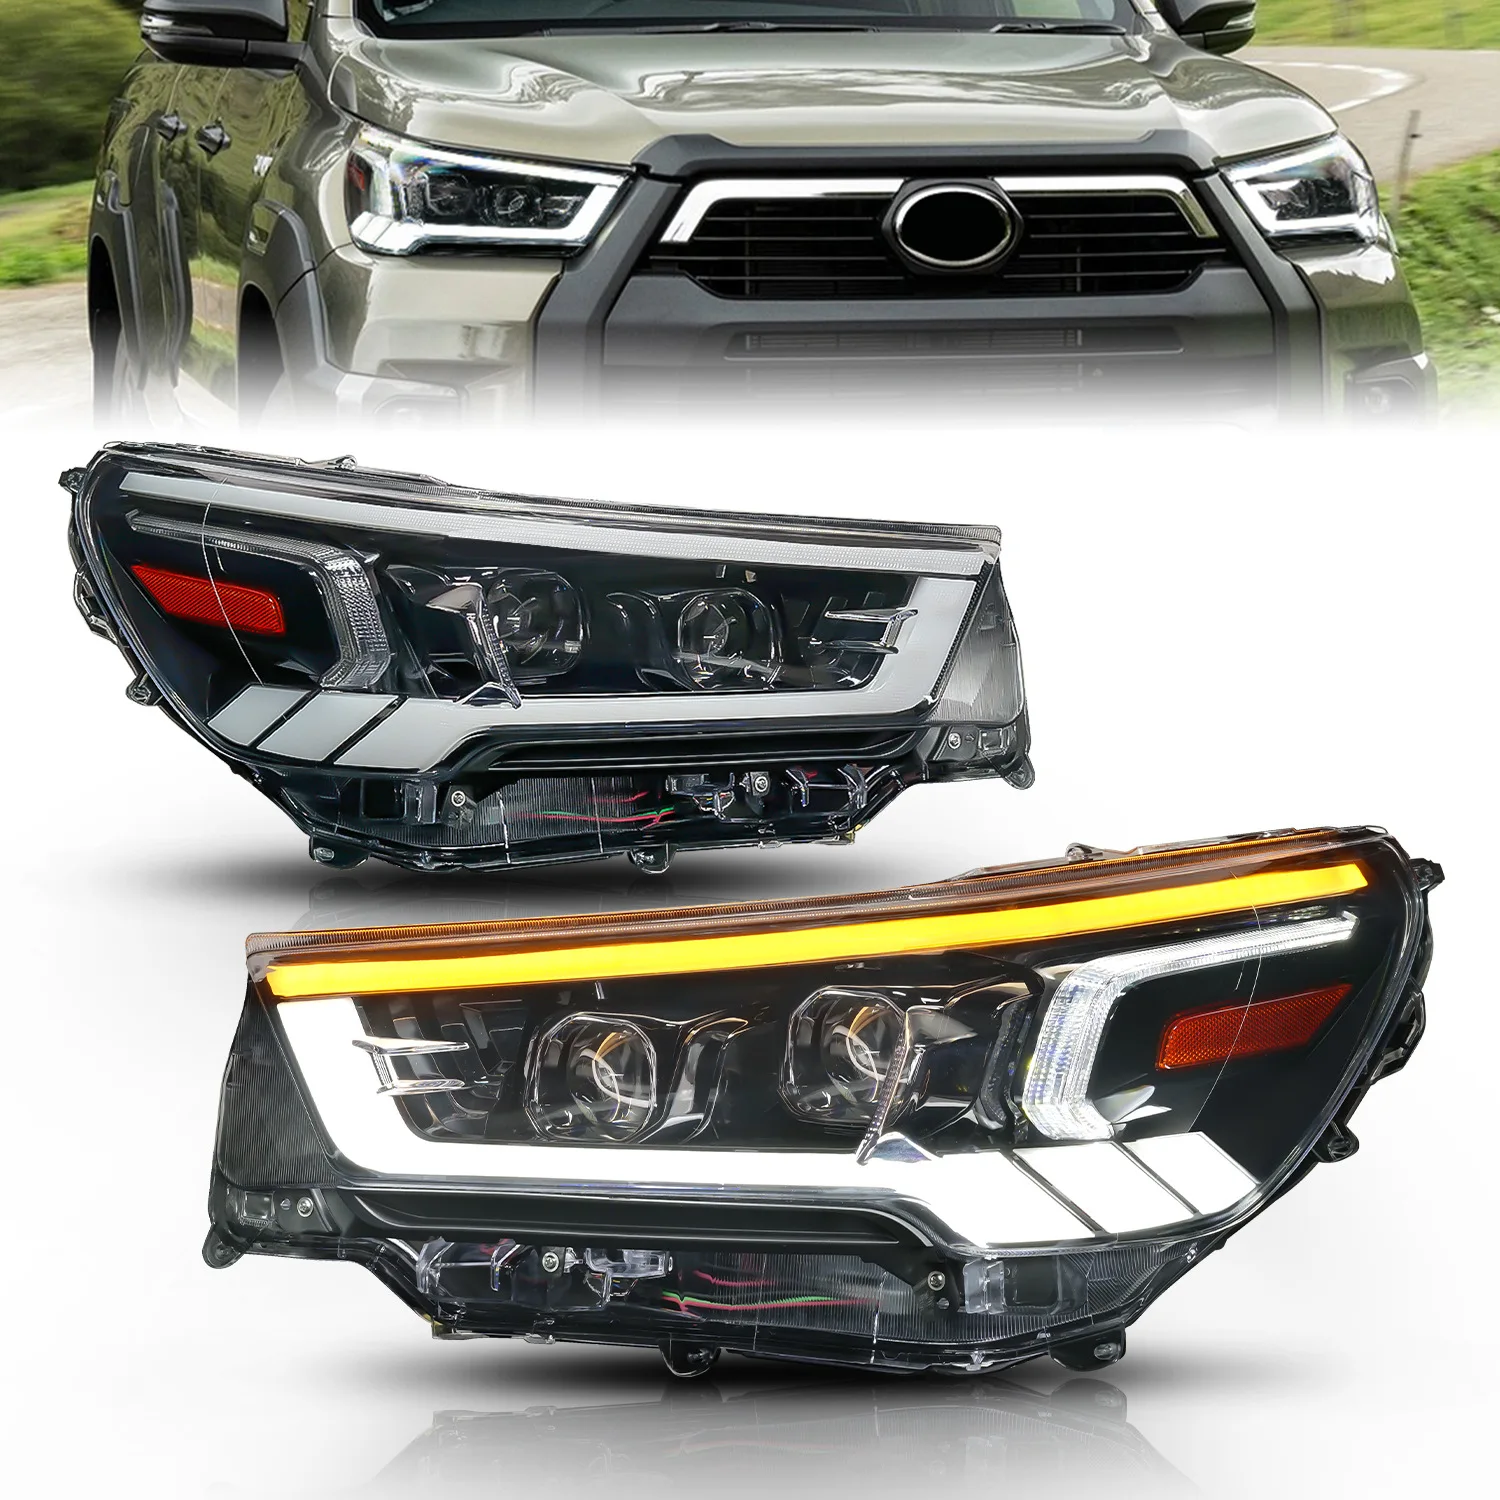 

For Toyota Hilux Revo Rocco 2021 2022 2023 Headlamps Head lamp Assembly Car Headlight LED 12V DRL Car Accessories Modification